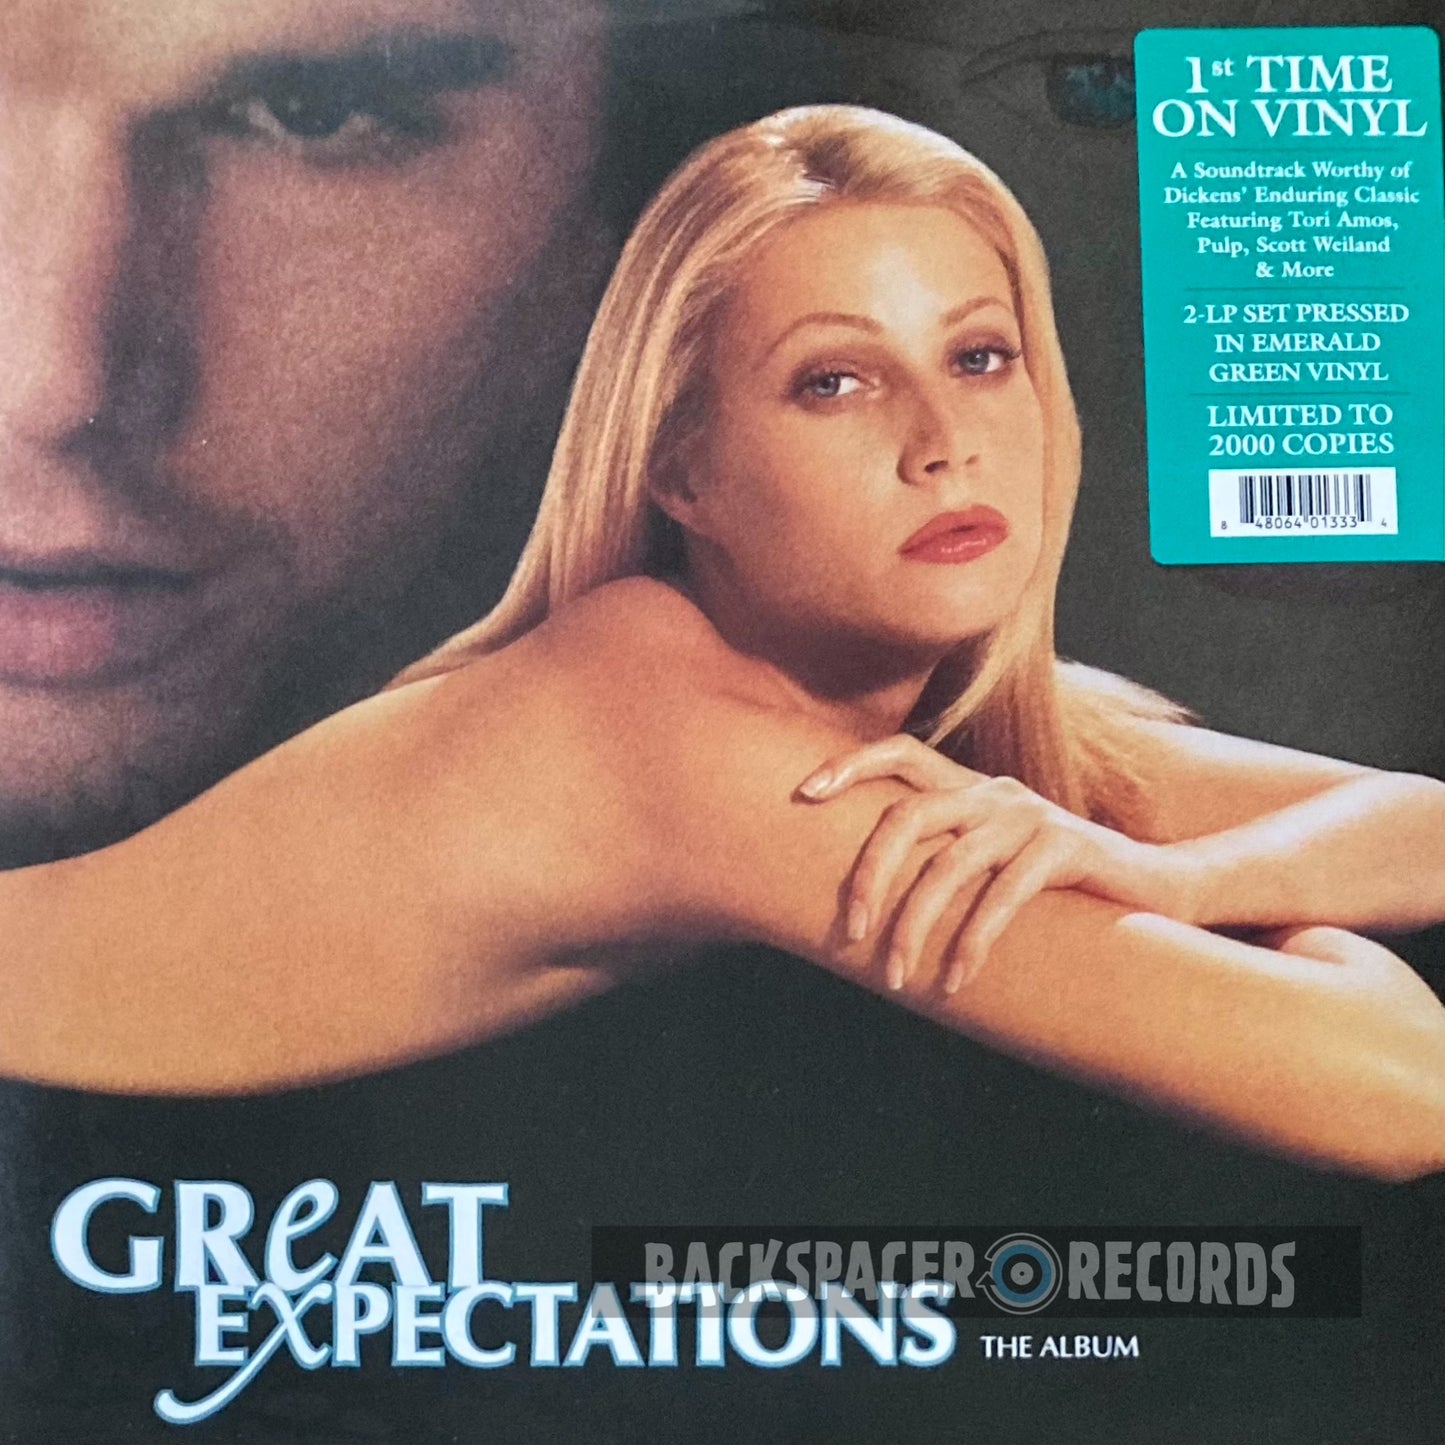 Great Expectations: The Album - Various Artists (Limited Edition) 2-LP (Sealed)